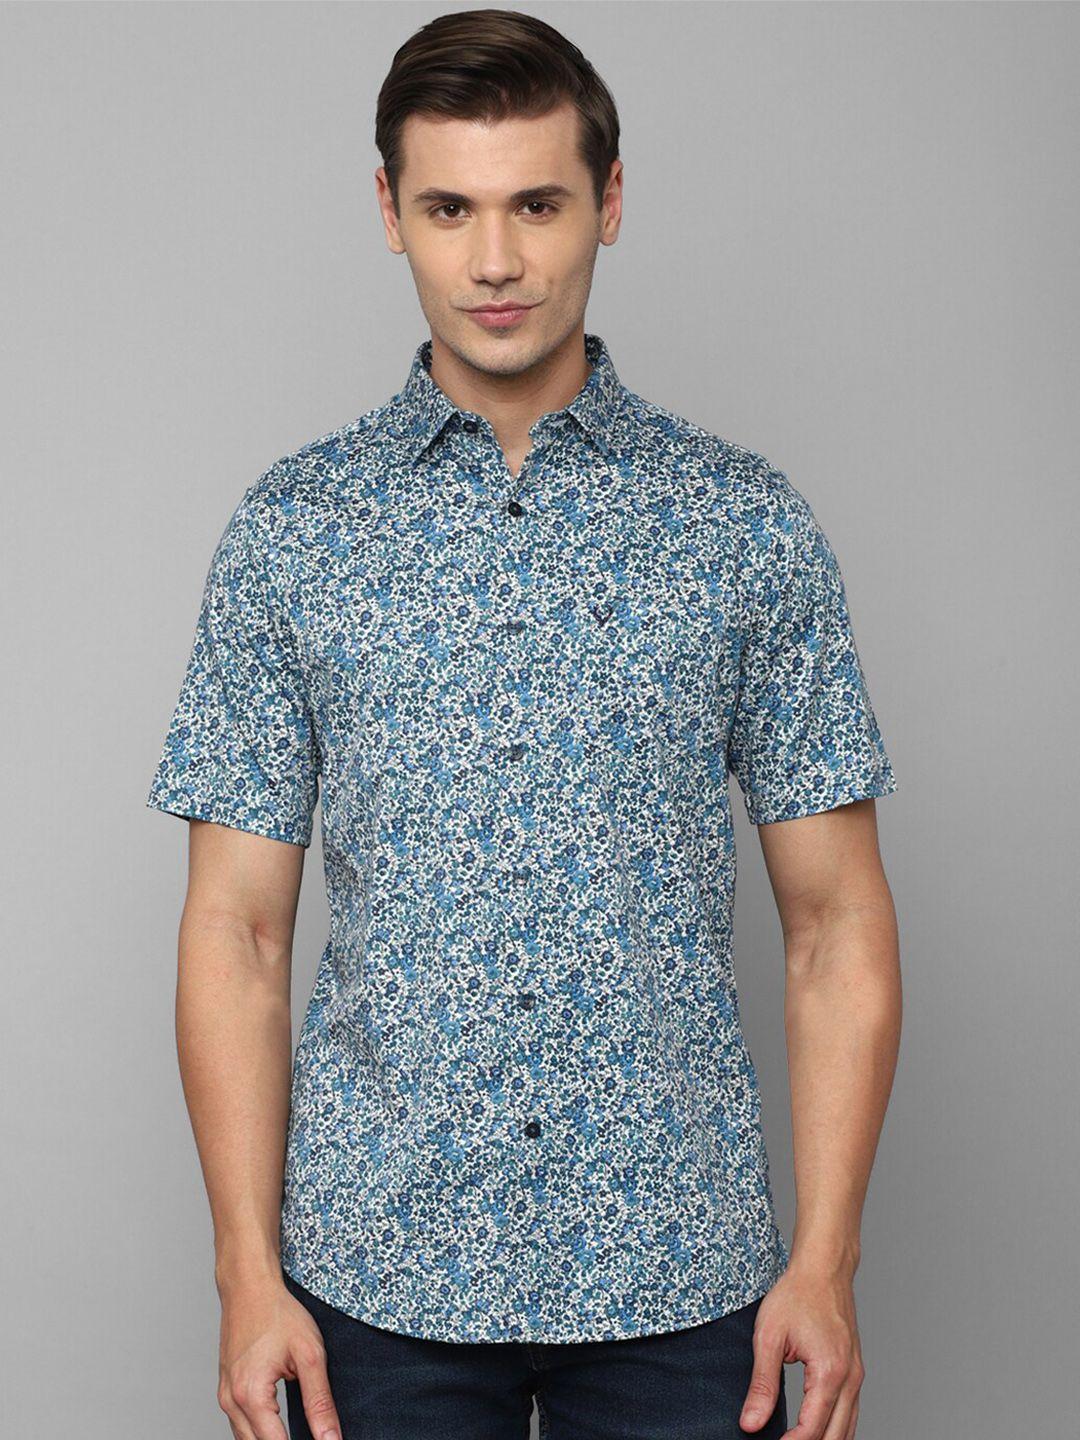 allen solly short sleeves slim fit floral printed casual shirt